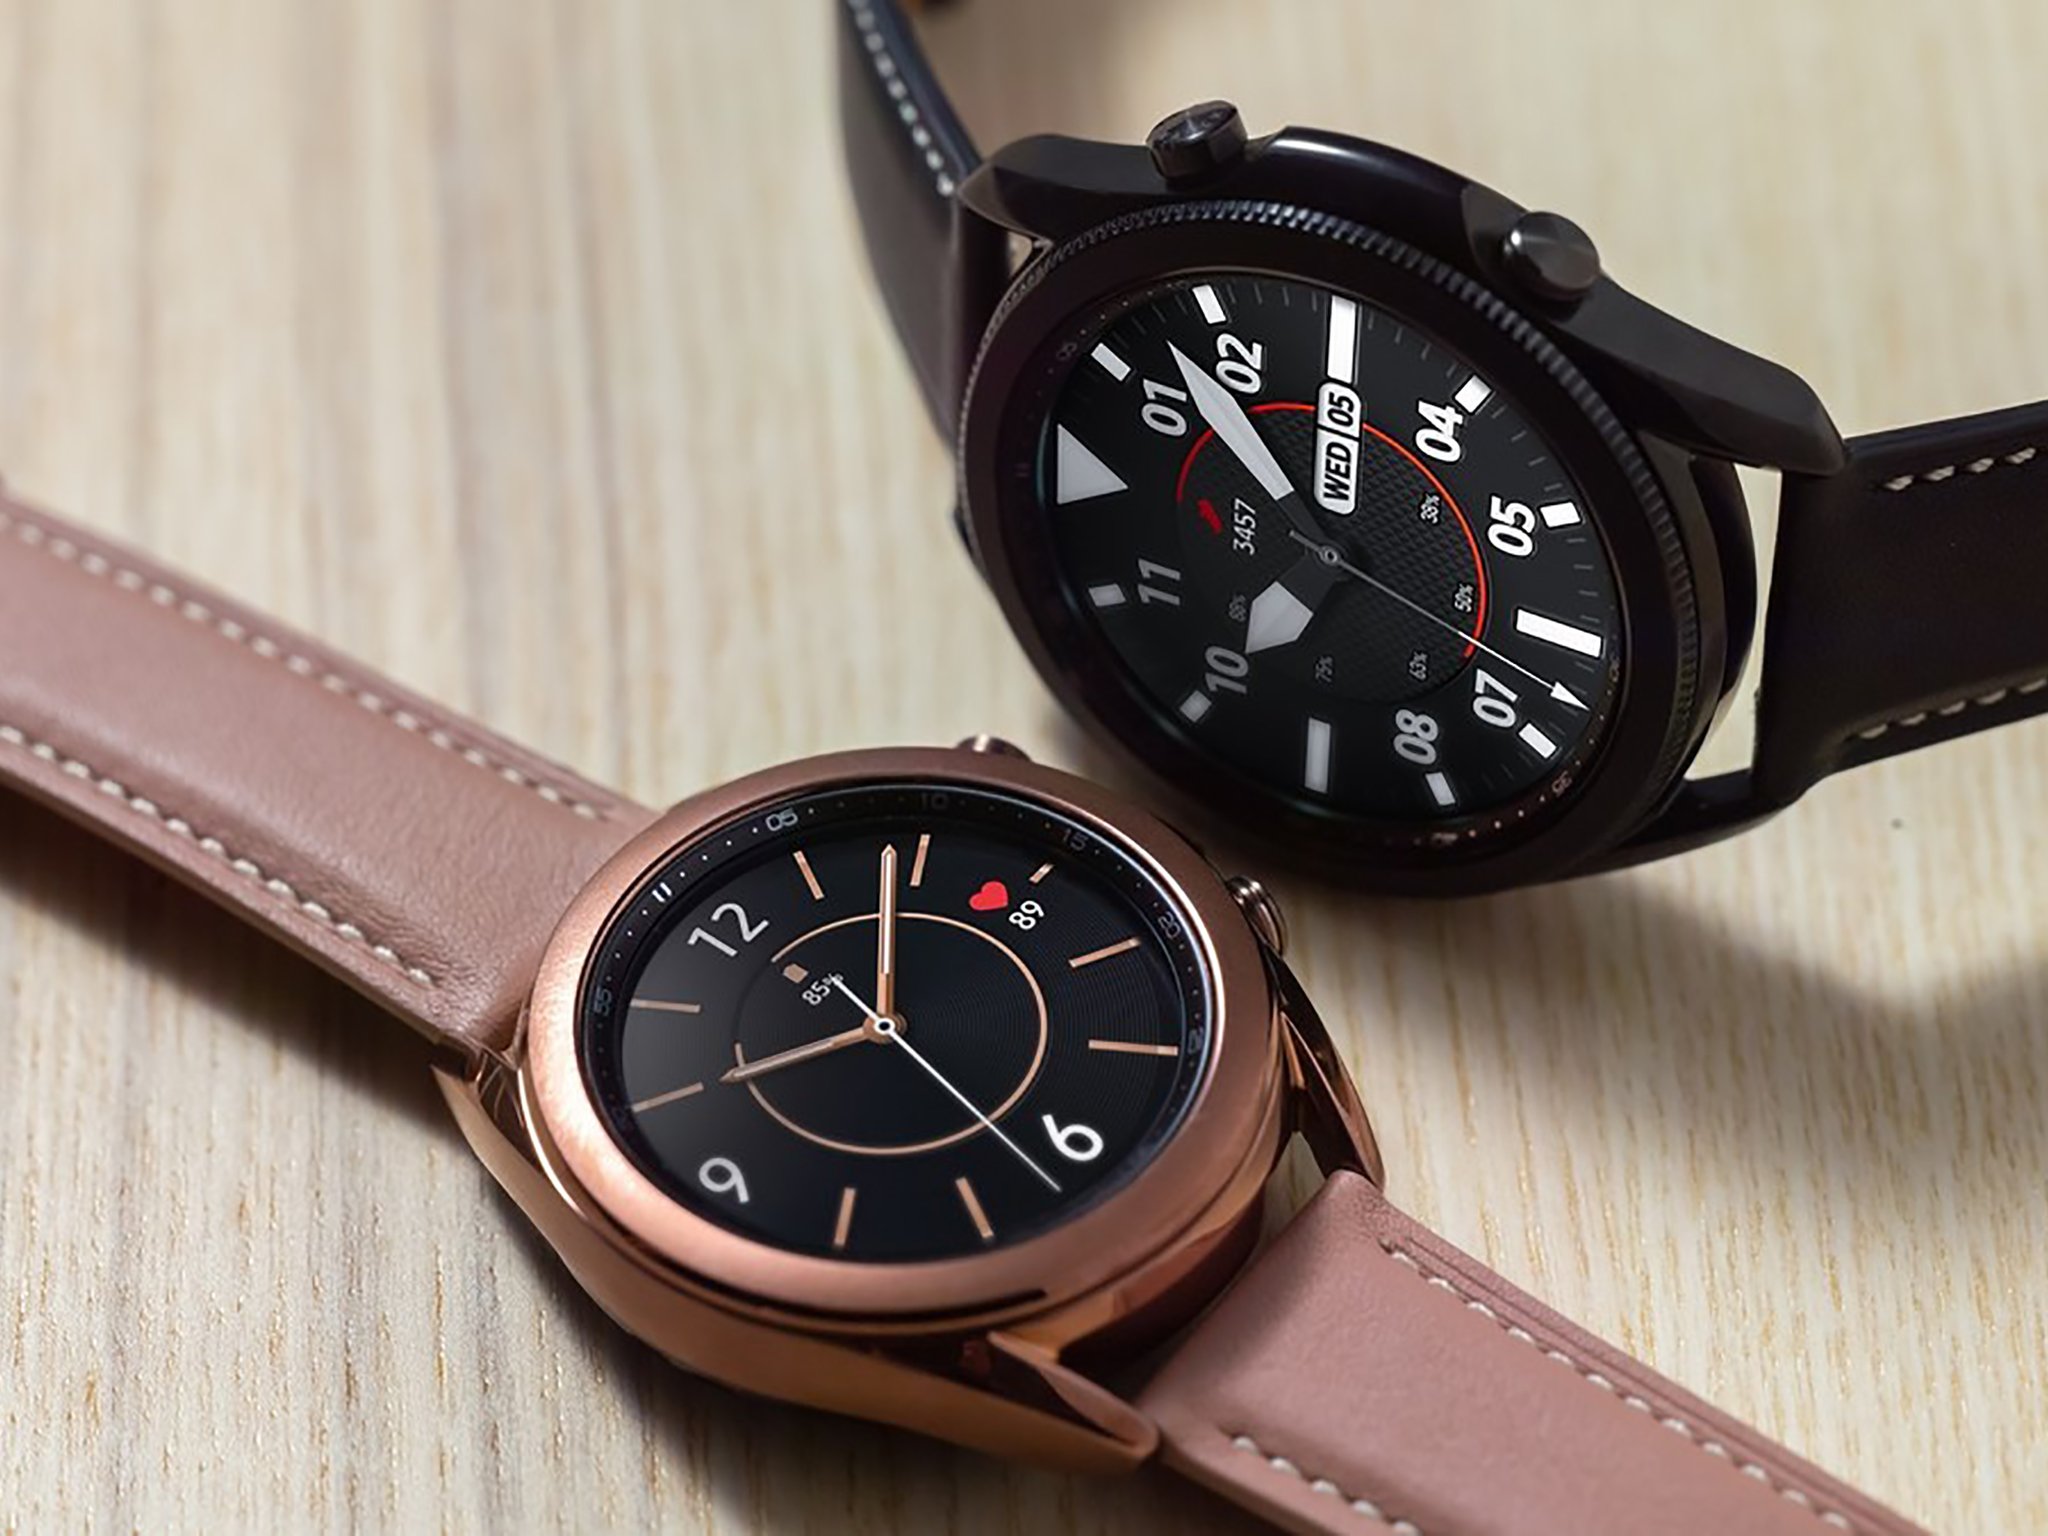 Samsung unveils Exynos chipset powering the Galaxy Watch 4 ' and it is insane